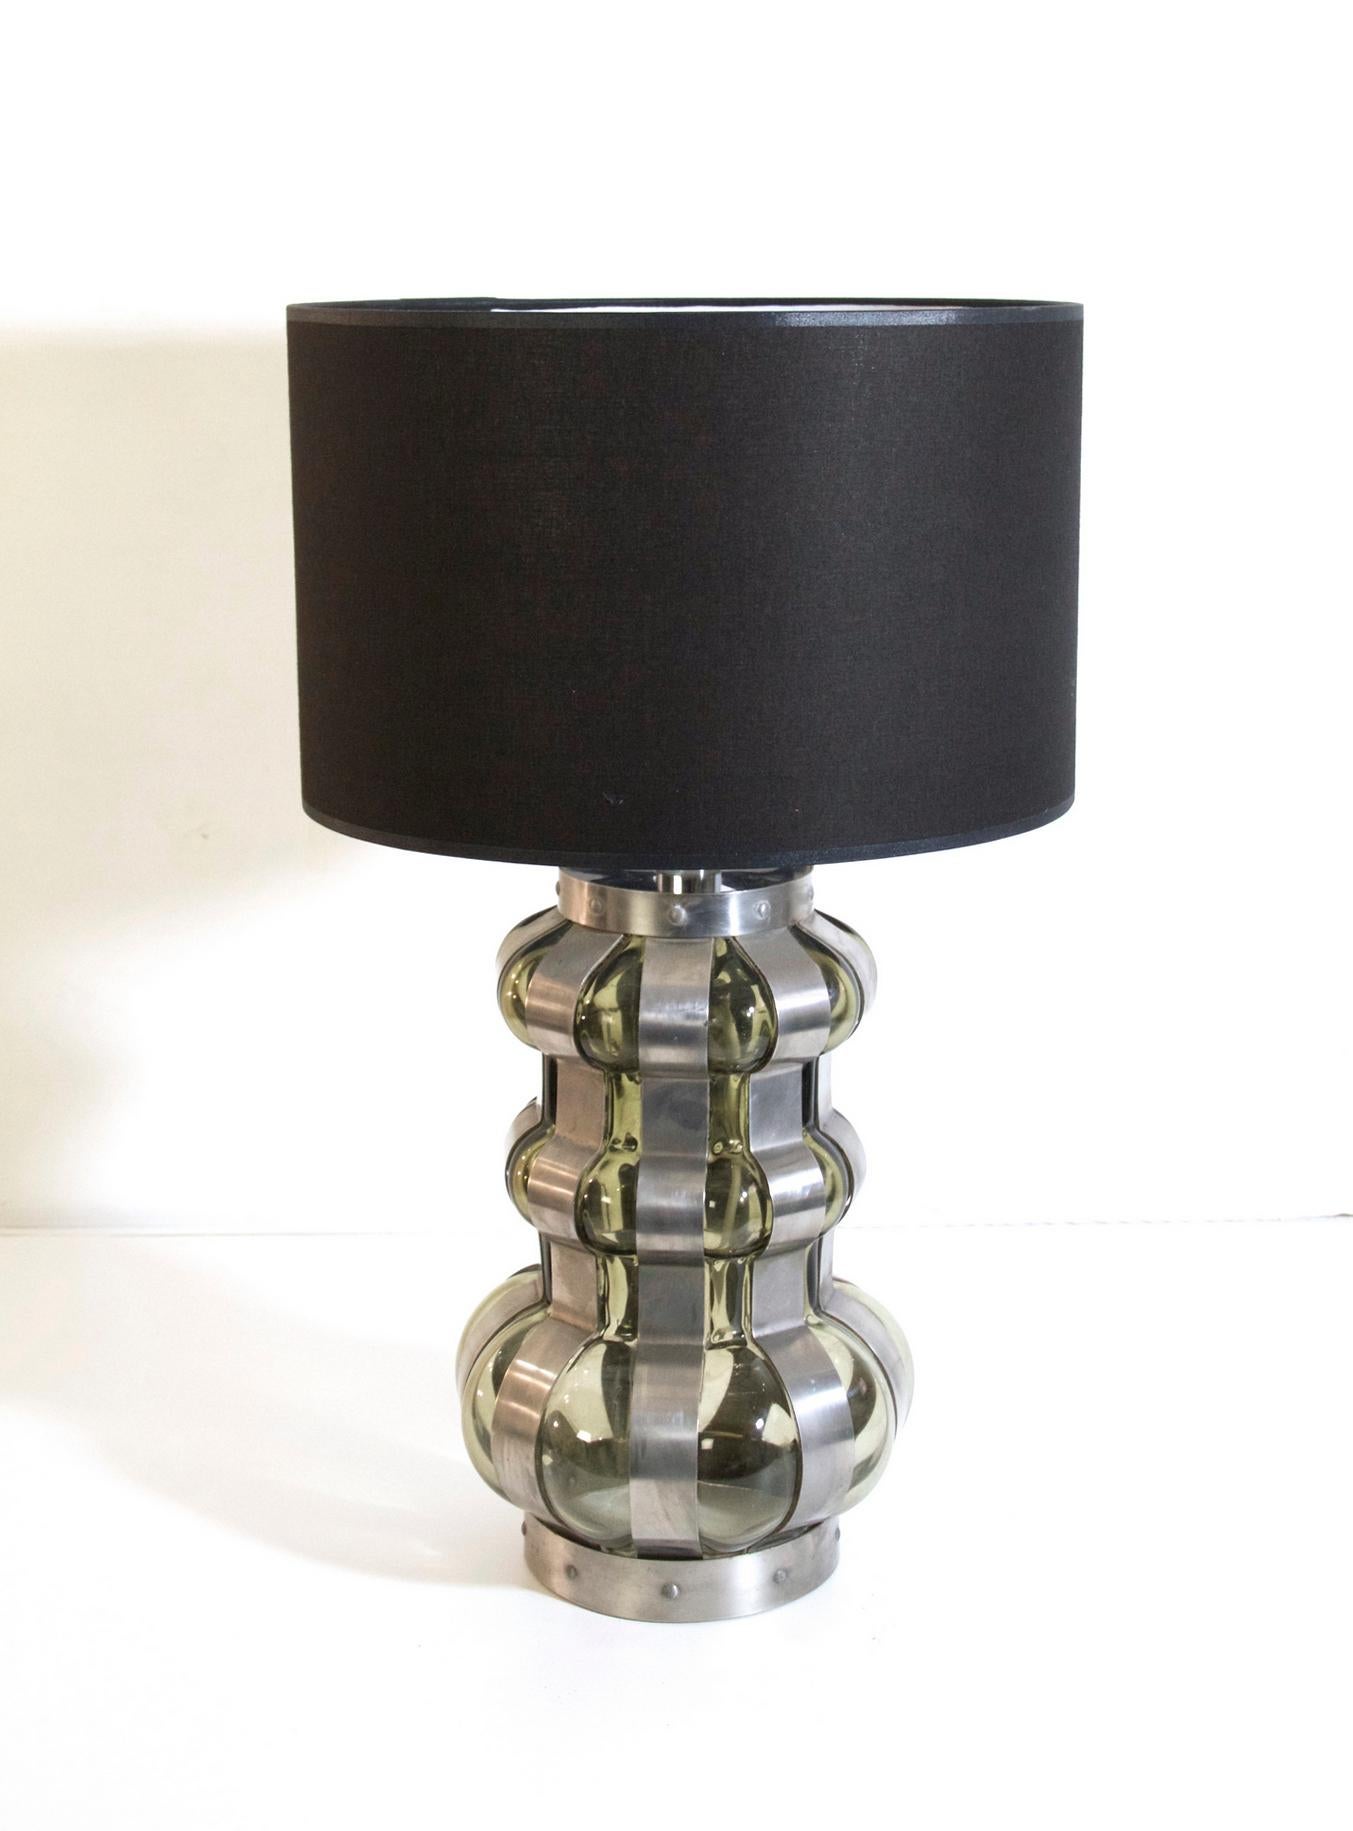 Metal Brutalist Style Italian Table Lamp, 1960s For Sale